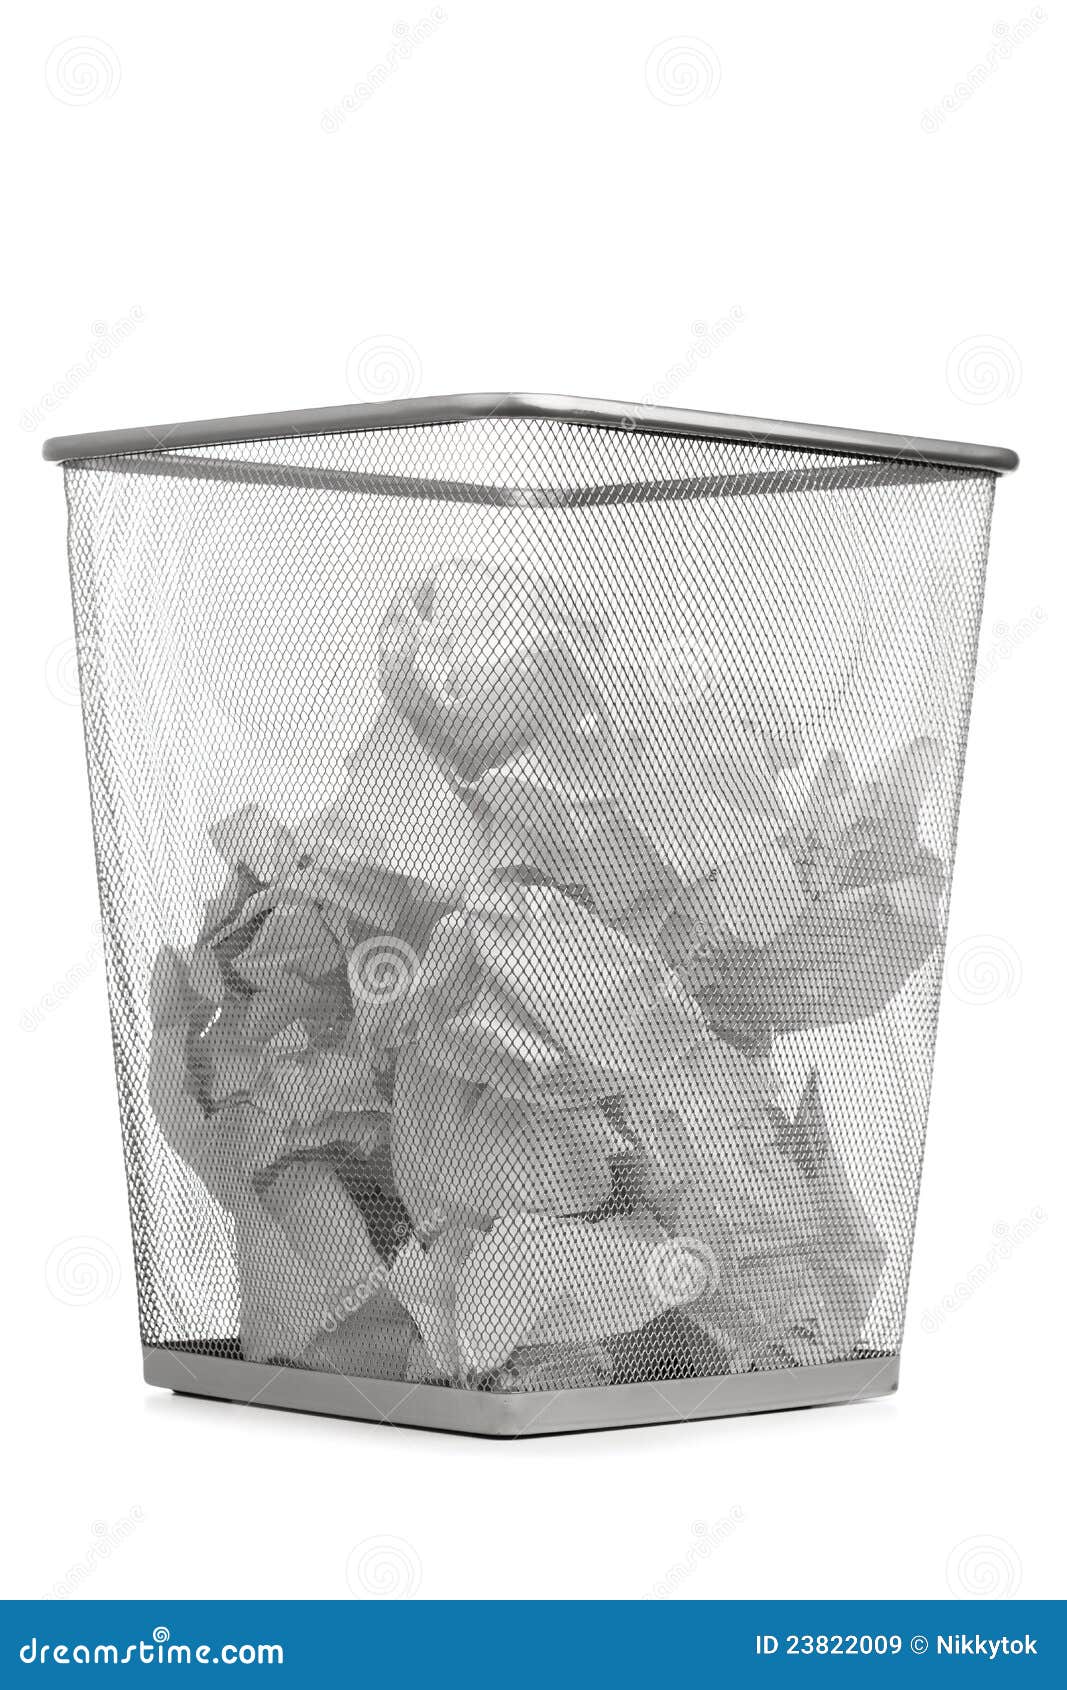 https://thumbs.dreamstime.com/z/office-trash-can-crumpled-paper-23822009.jpg